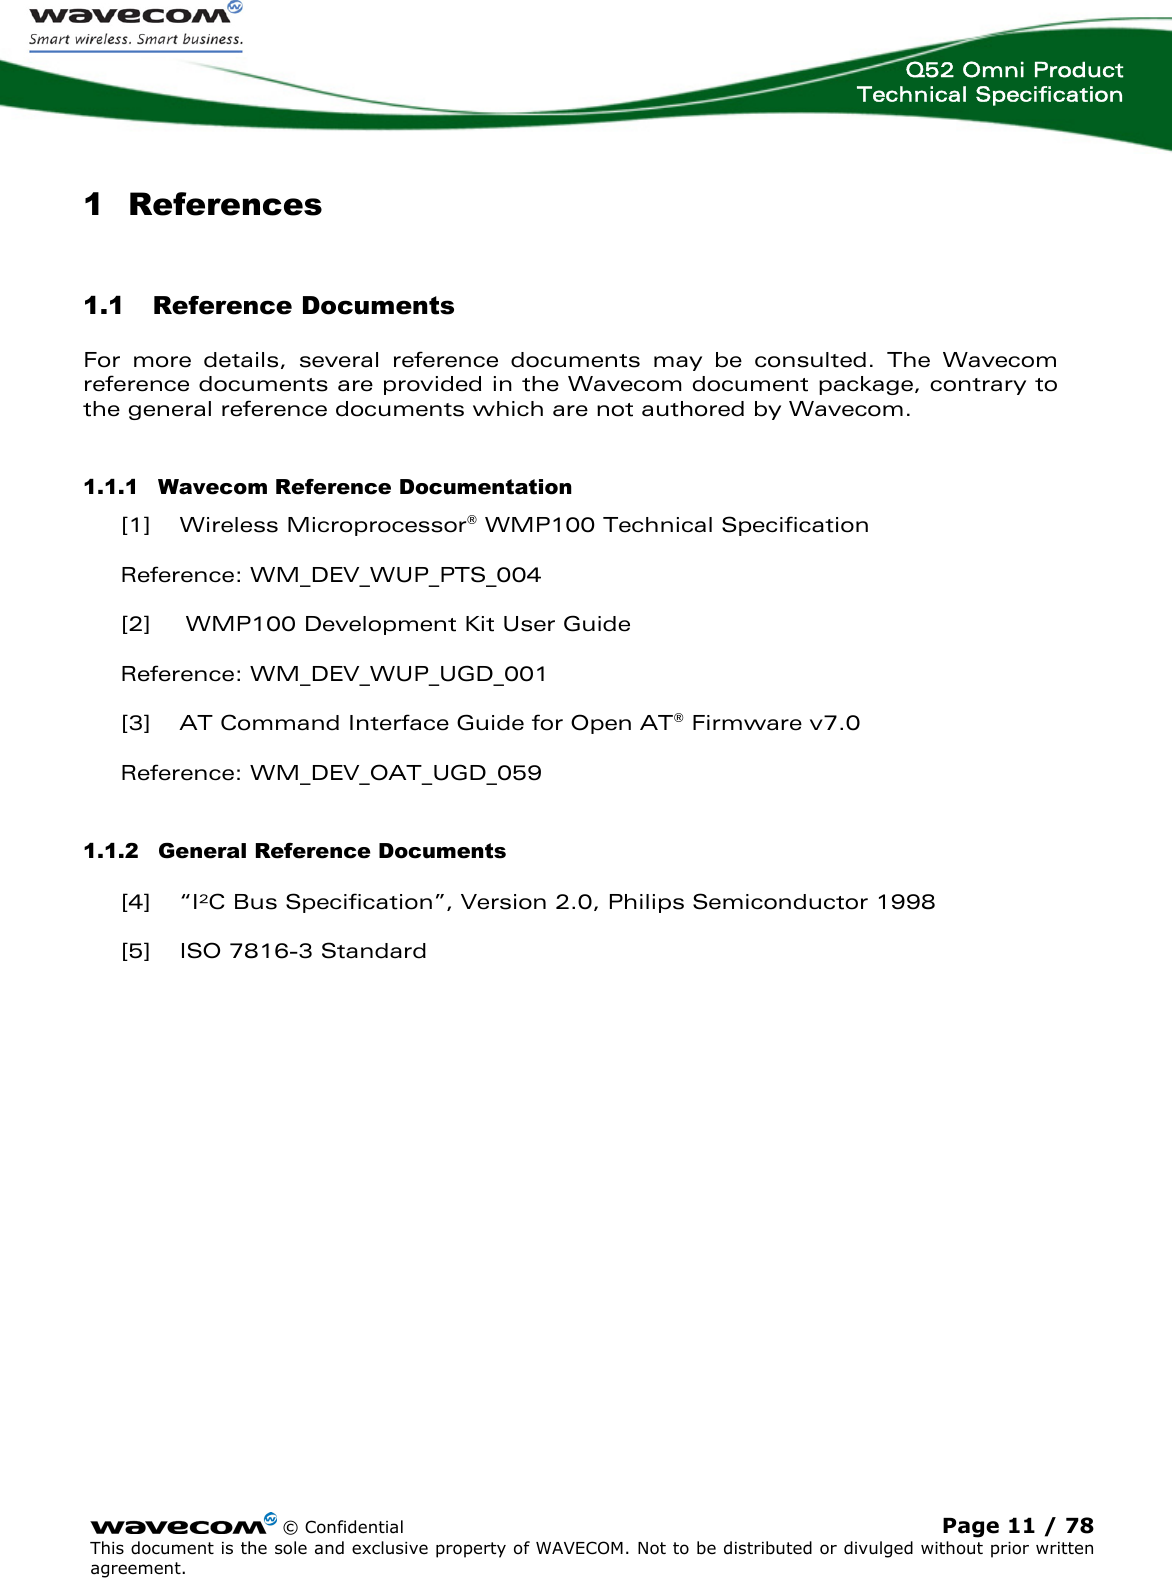  Q52 Omni Product Technical Specification    © Confidential Page 11 / 78 This document is the sole and exclusive property of WAVECOM. Not to be distributed or divulged without prior written agreement.  1 References 1.1 Reference Documents For more details, several reference documents may be consulted. The Wavecom reference documents are provided in the Wavecom document package, contrary to the general reference documents which are not authored by Wavecom. 1.1.1 Wavecom Reference Documentation [1] Wireless Microprocessor® WMP100 Technical Specification Reference: WM_DEV_WUP_PTS_004 [2] WMP100 Development Kit User Guide Reference: WM_DEV_WUP_UGD_001 [3] AT Command Interface Guide for Open AT® Firmware v7.0 Reference: WM_DEV_OAT_UGD_059 1.1.2 General Reference Documents [4] “I²C Bus Specification”, Version 2.0, Philips Semiconductor 1998 [5] ISO 7816-3 Standard 